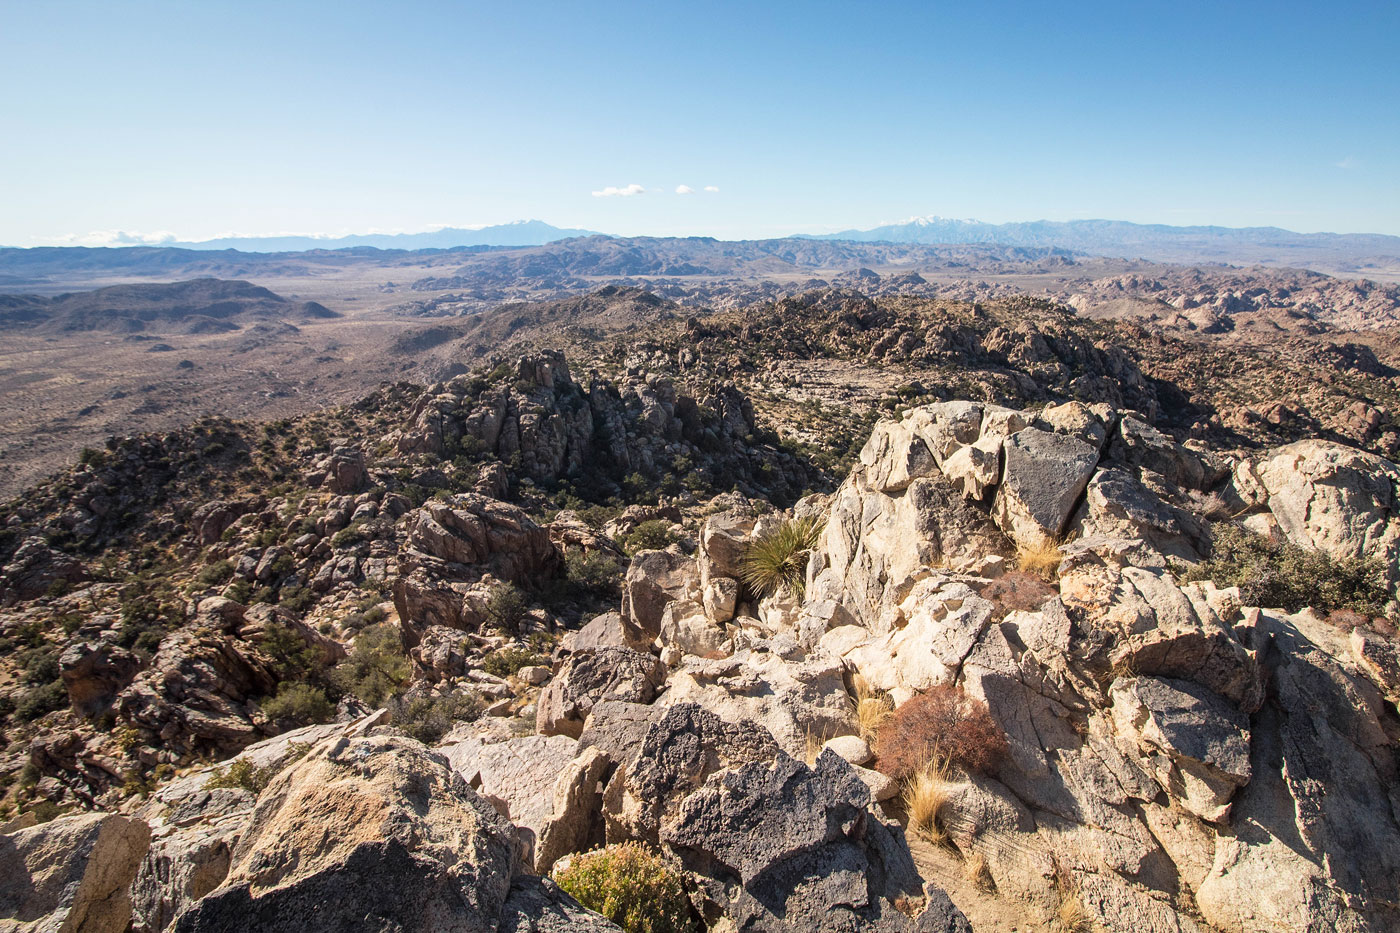 Hike Queen Mountain in Joshua Tree National Park, California - Stav is Lost